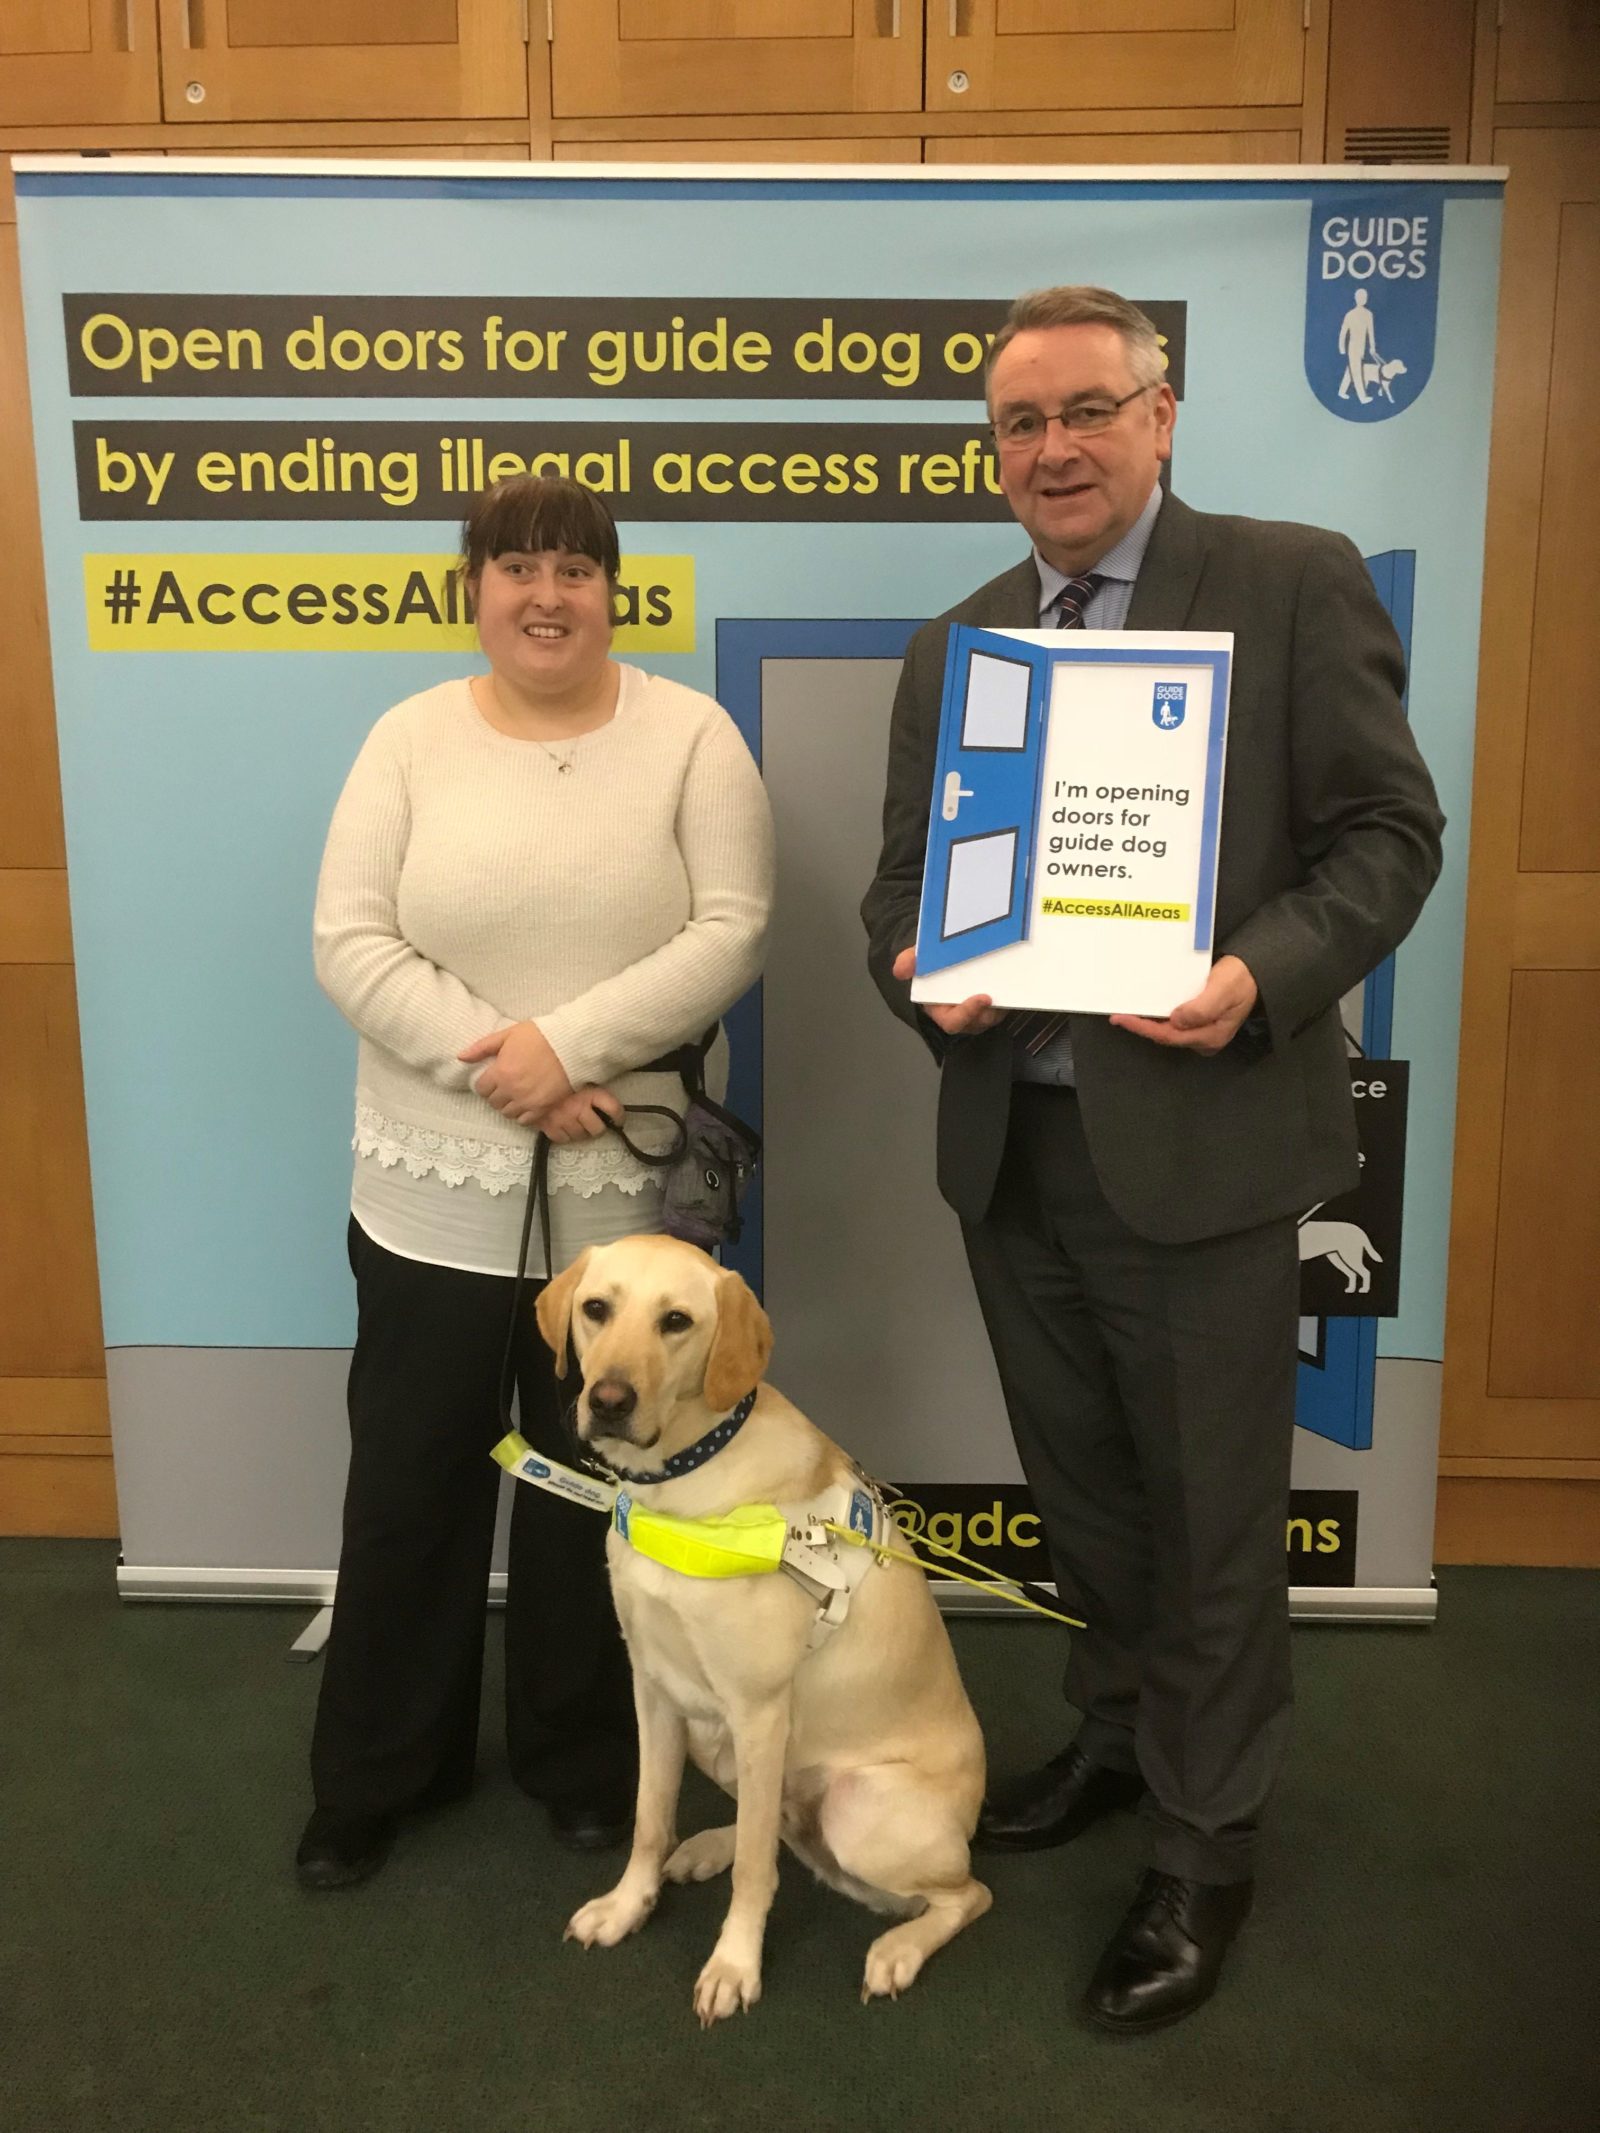 Alan Campbell MP supporting Guide Dogs